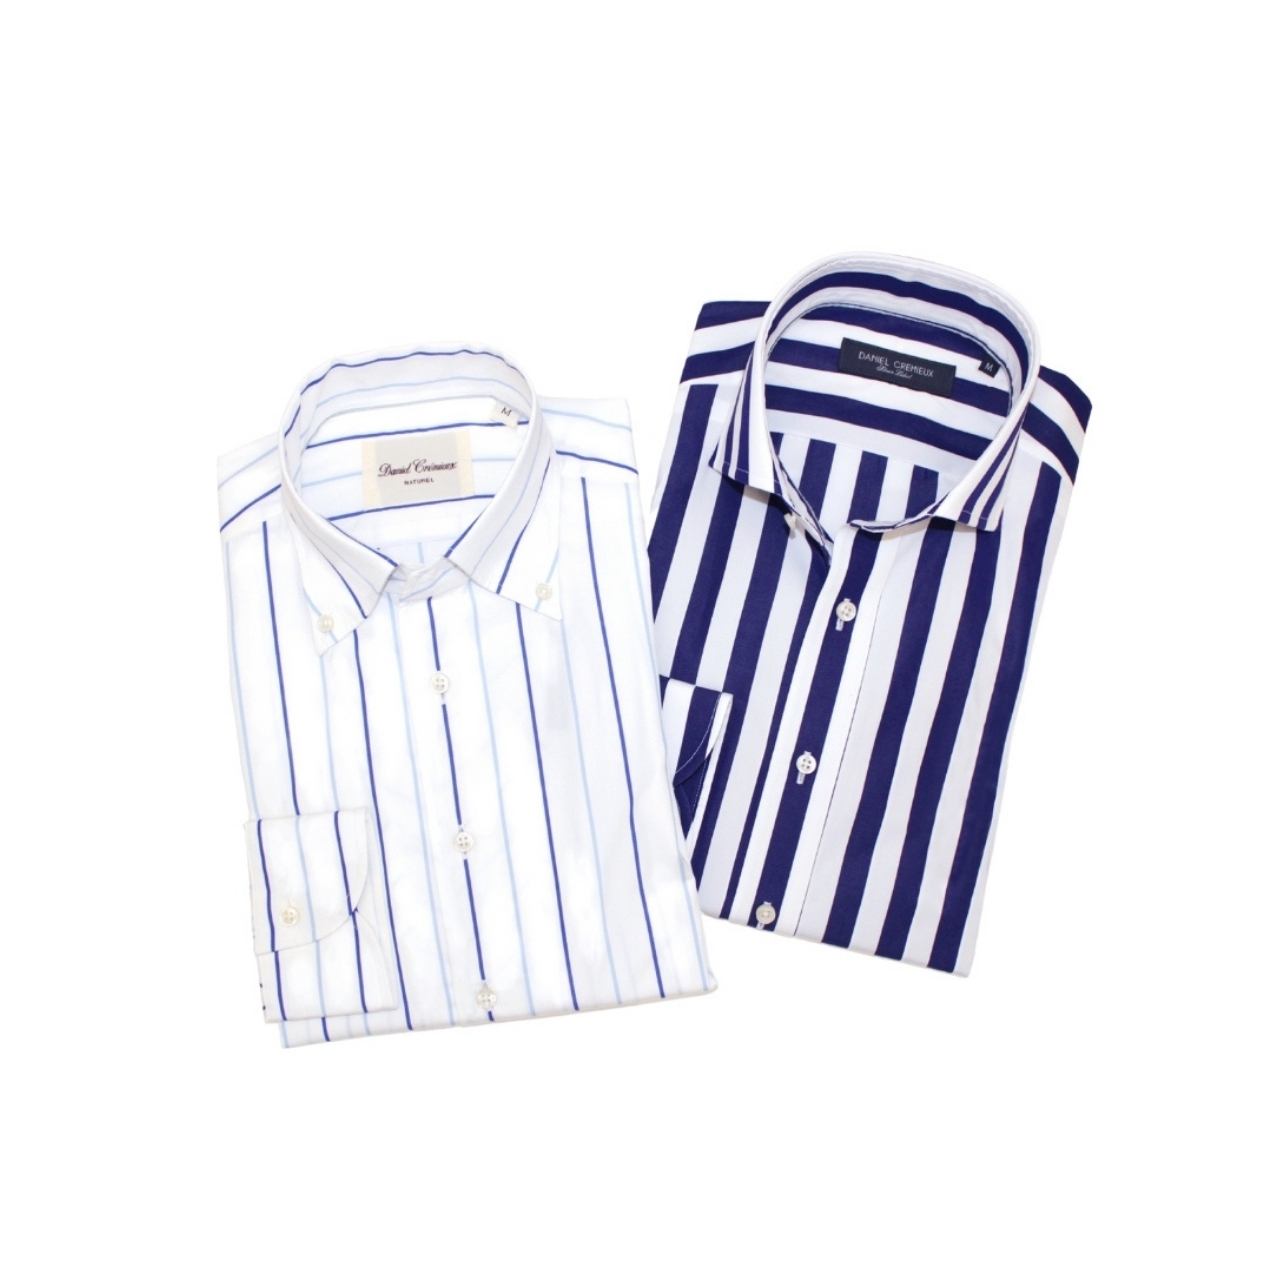 Cremieux, Assouline's go-to brand for dress shirts and jackets